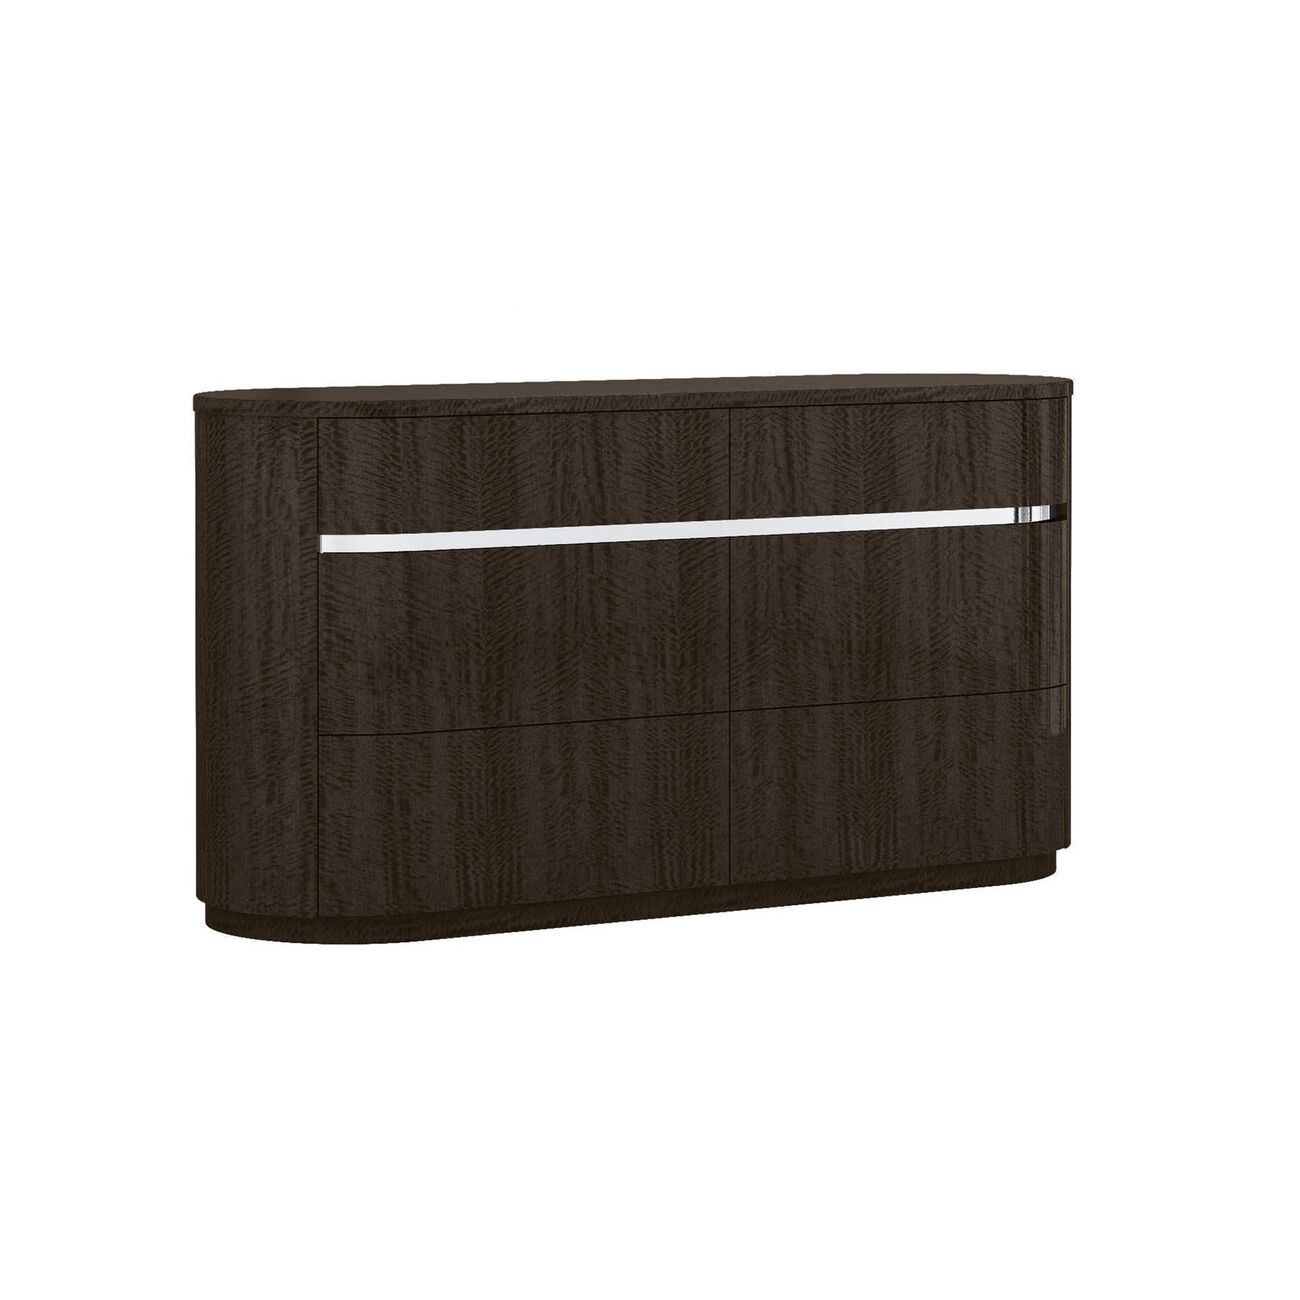 Obround Wooden Dresser with Multiple Drawers and Silver Accent, Dark Brown